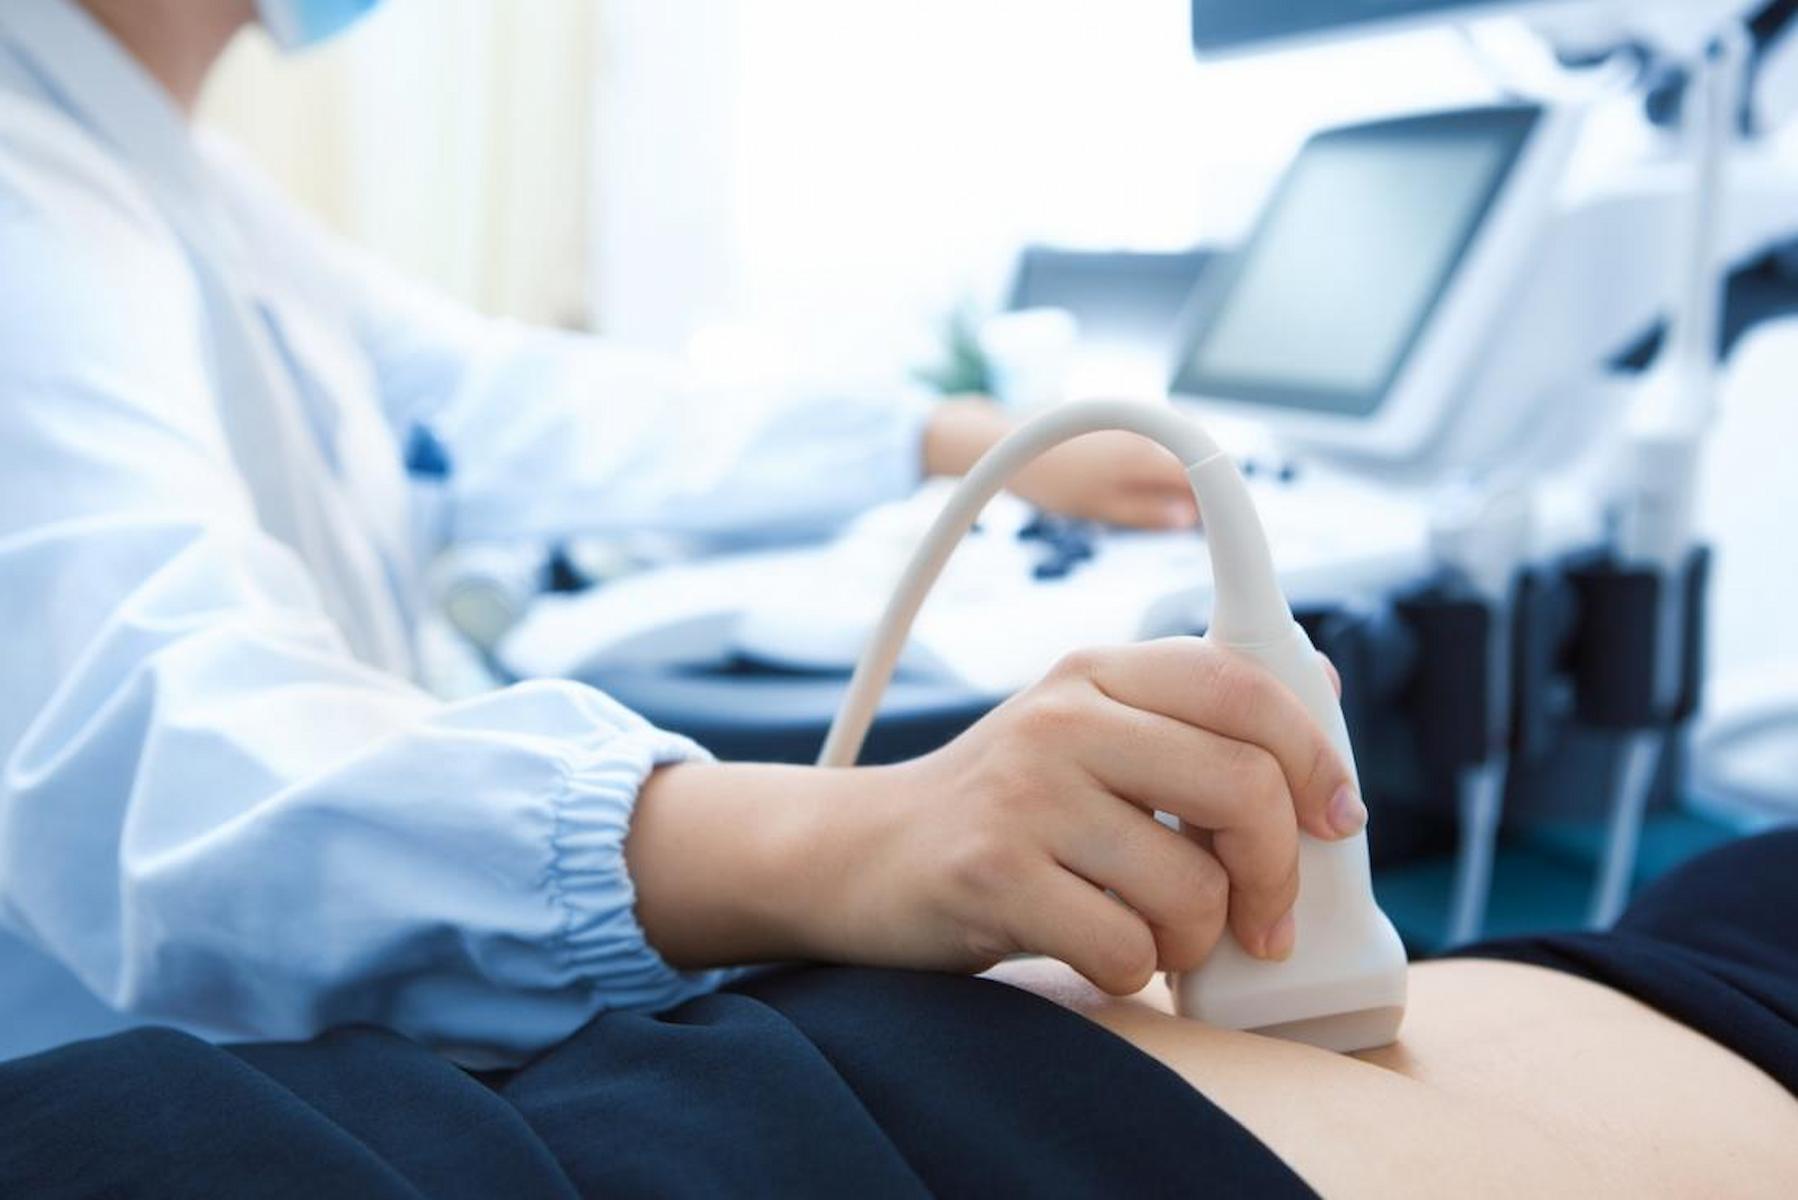 Do You Need To Get Ultrasound Done For Your Body?